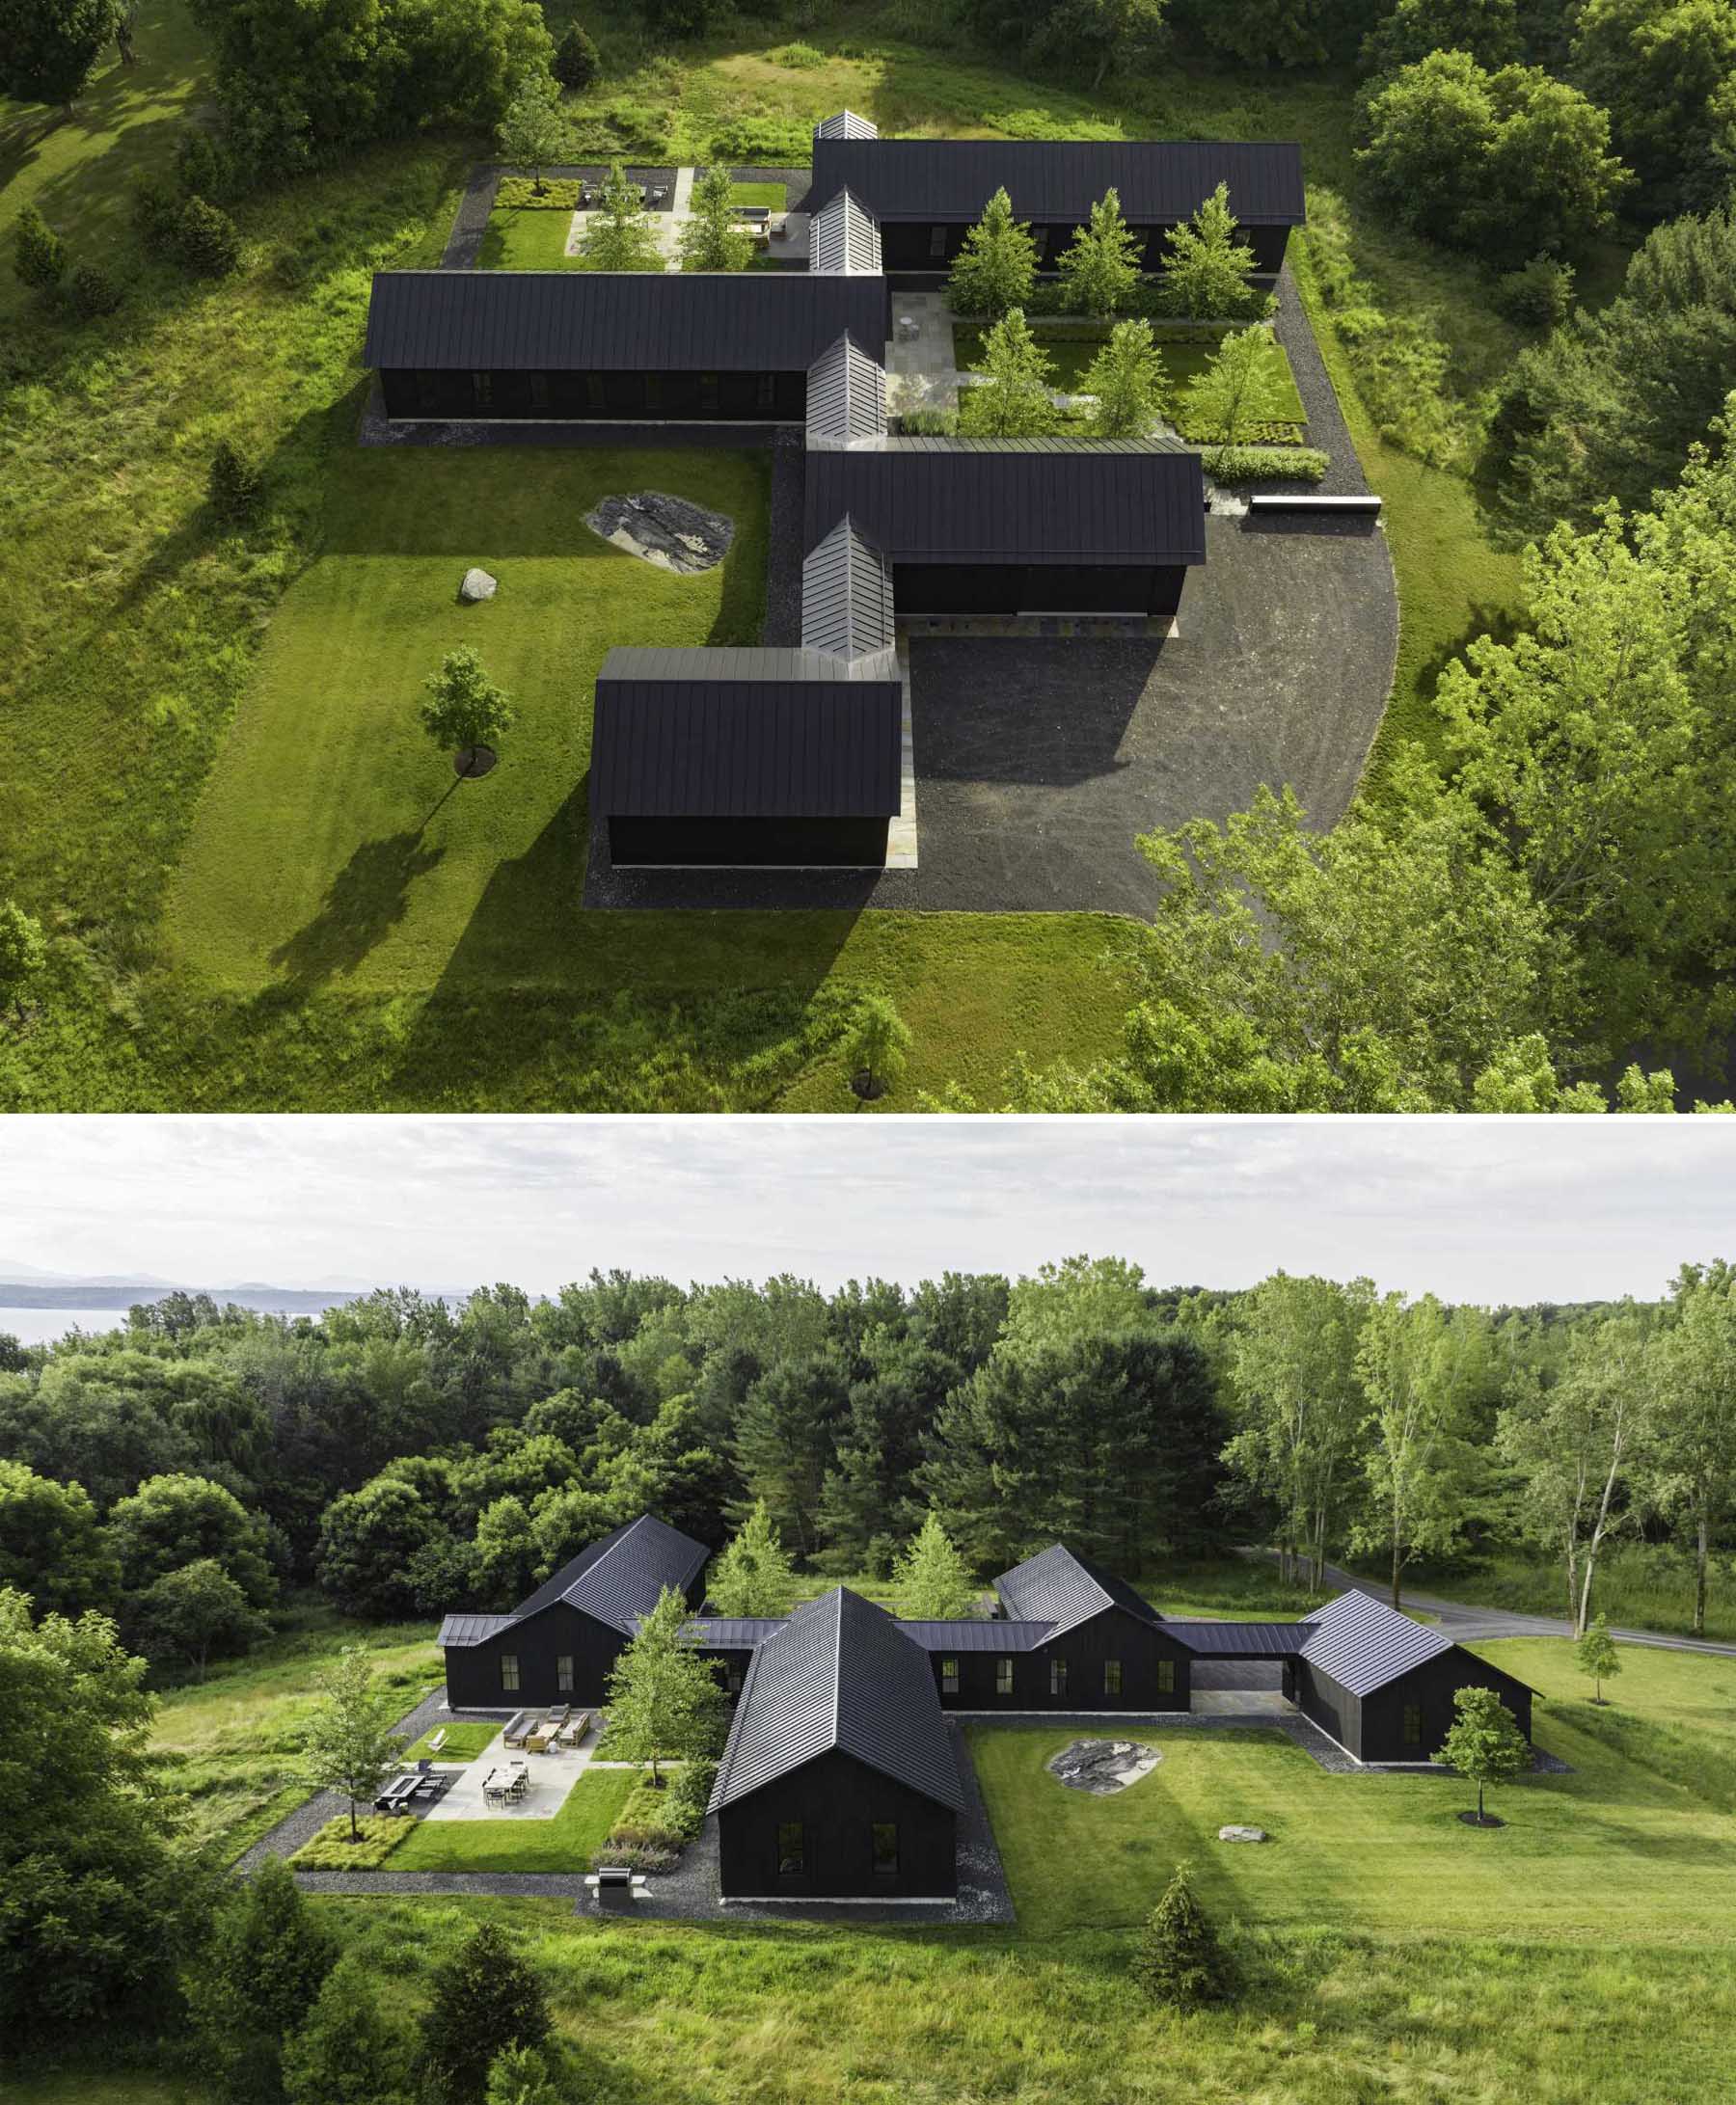 A modern house with standing seam roofing, black stained vertical cedar siding, and single-story gables with identical pitches.